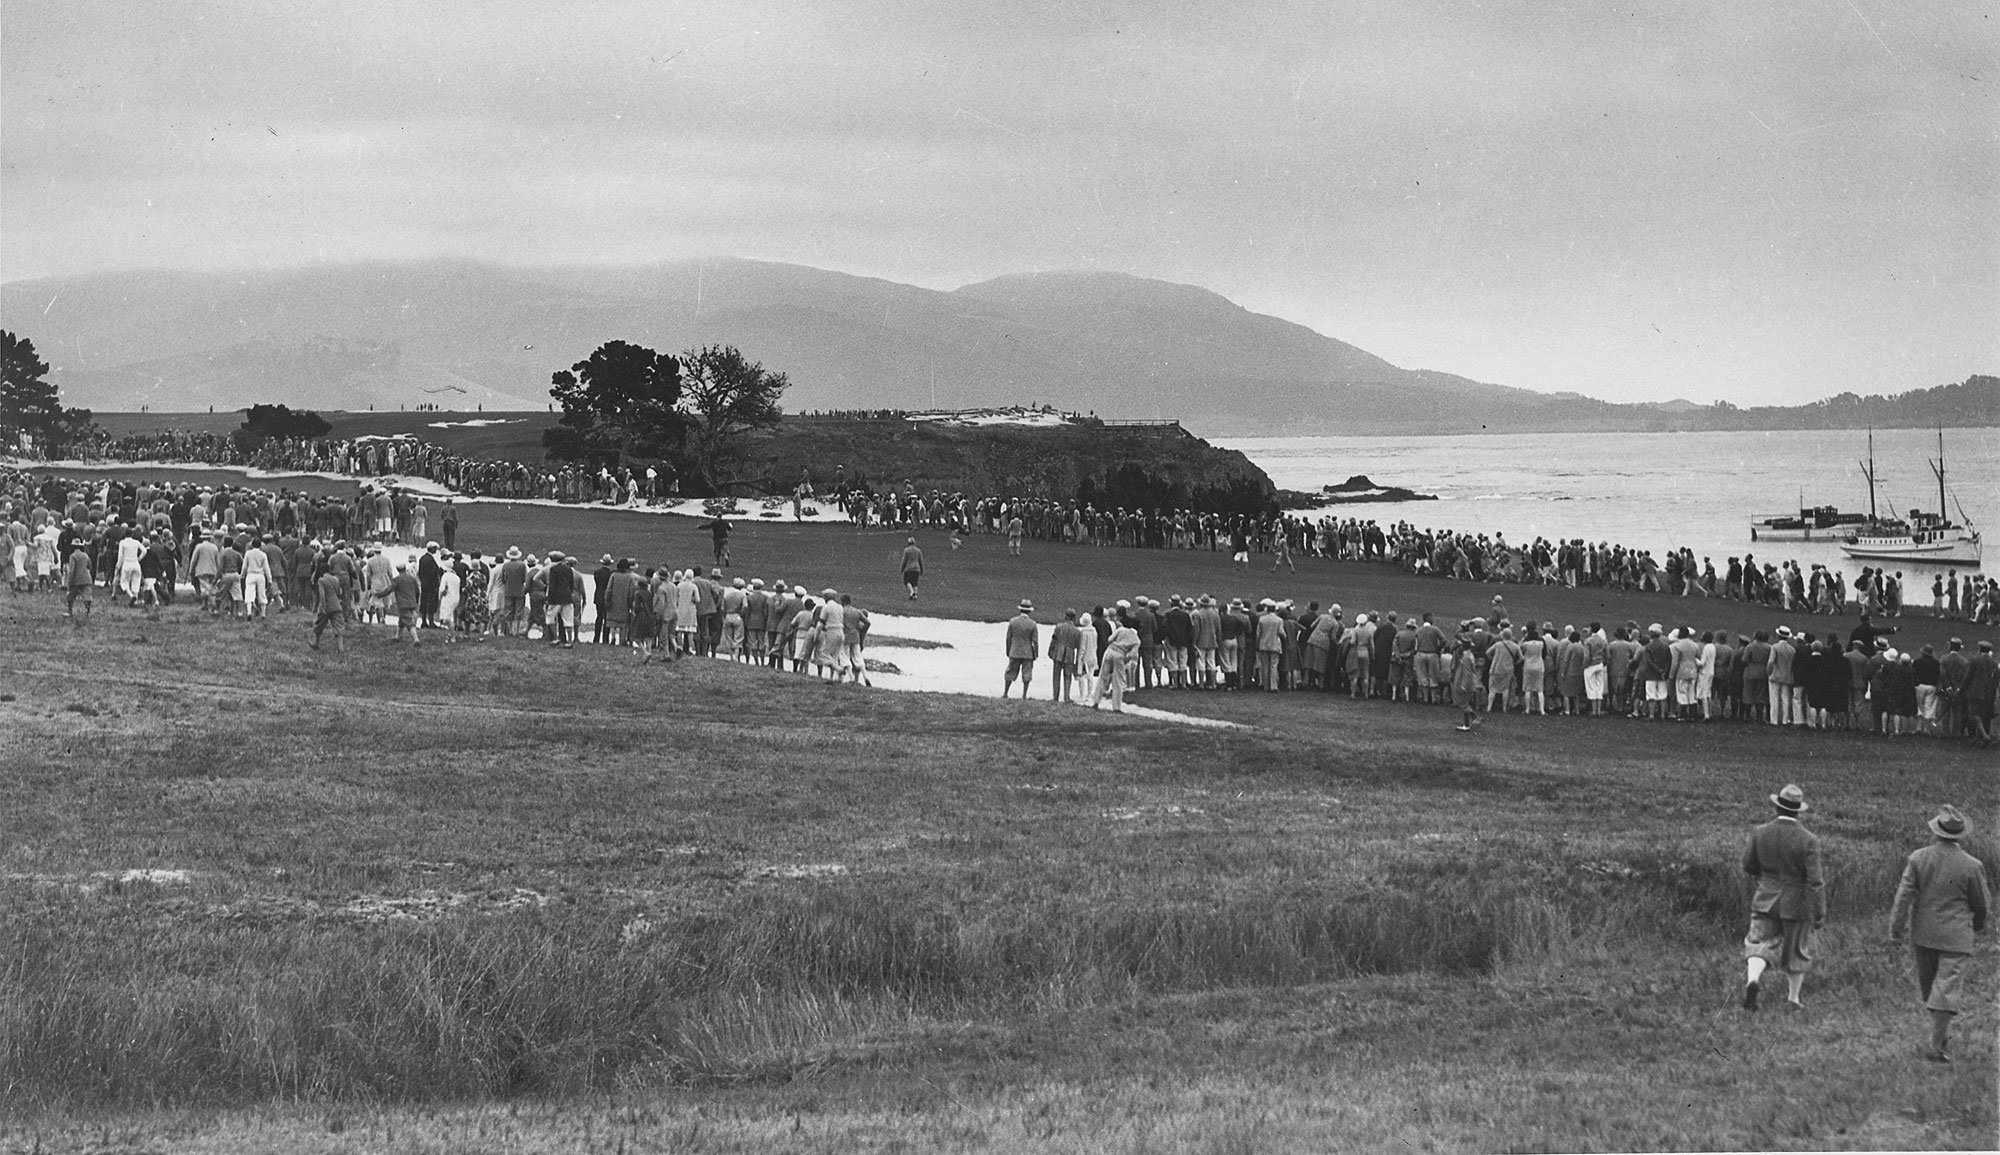 4th hole at Pebble Beach during 1929 U.S. Amateur